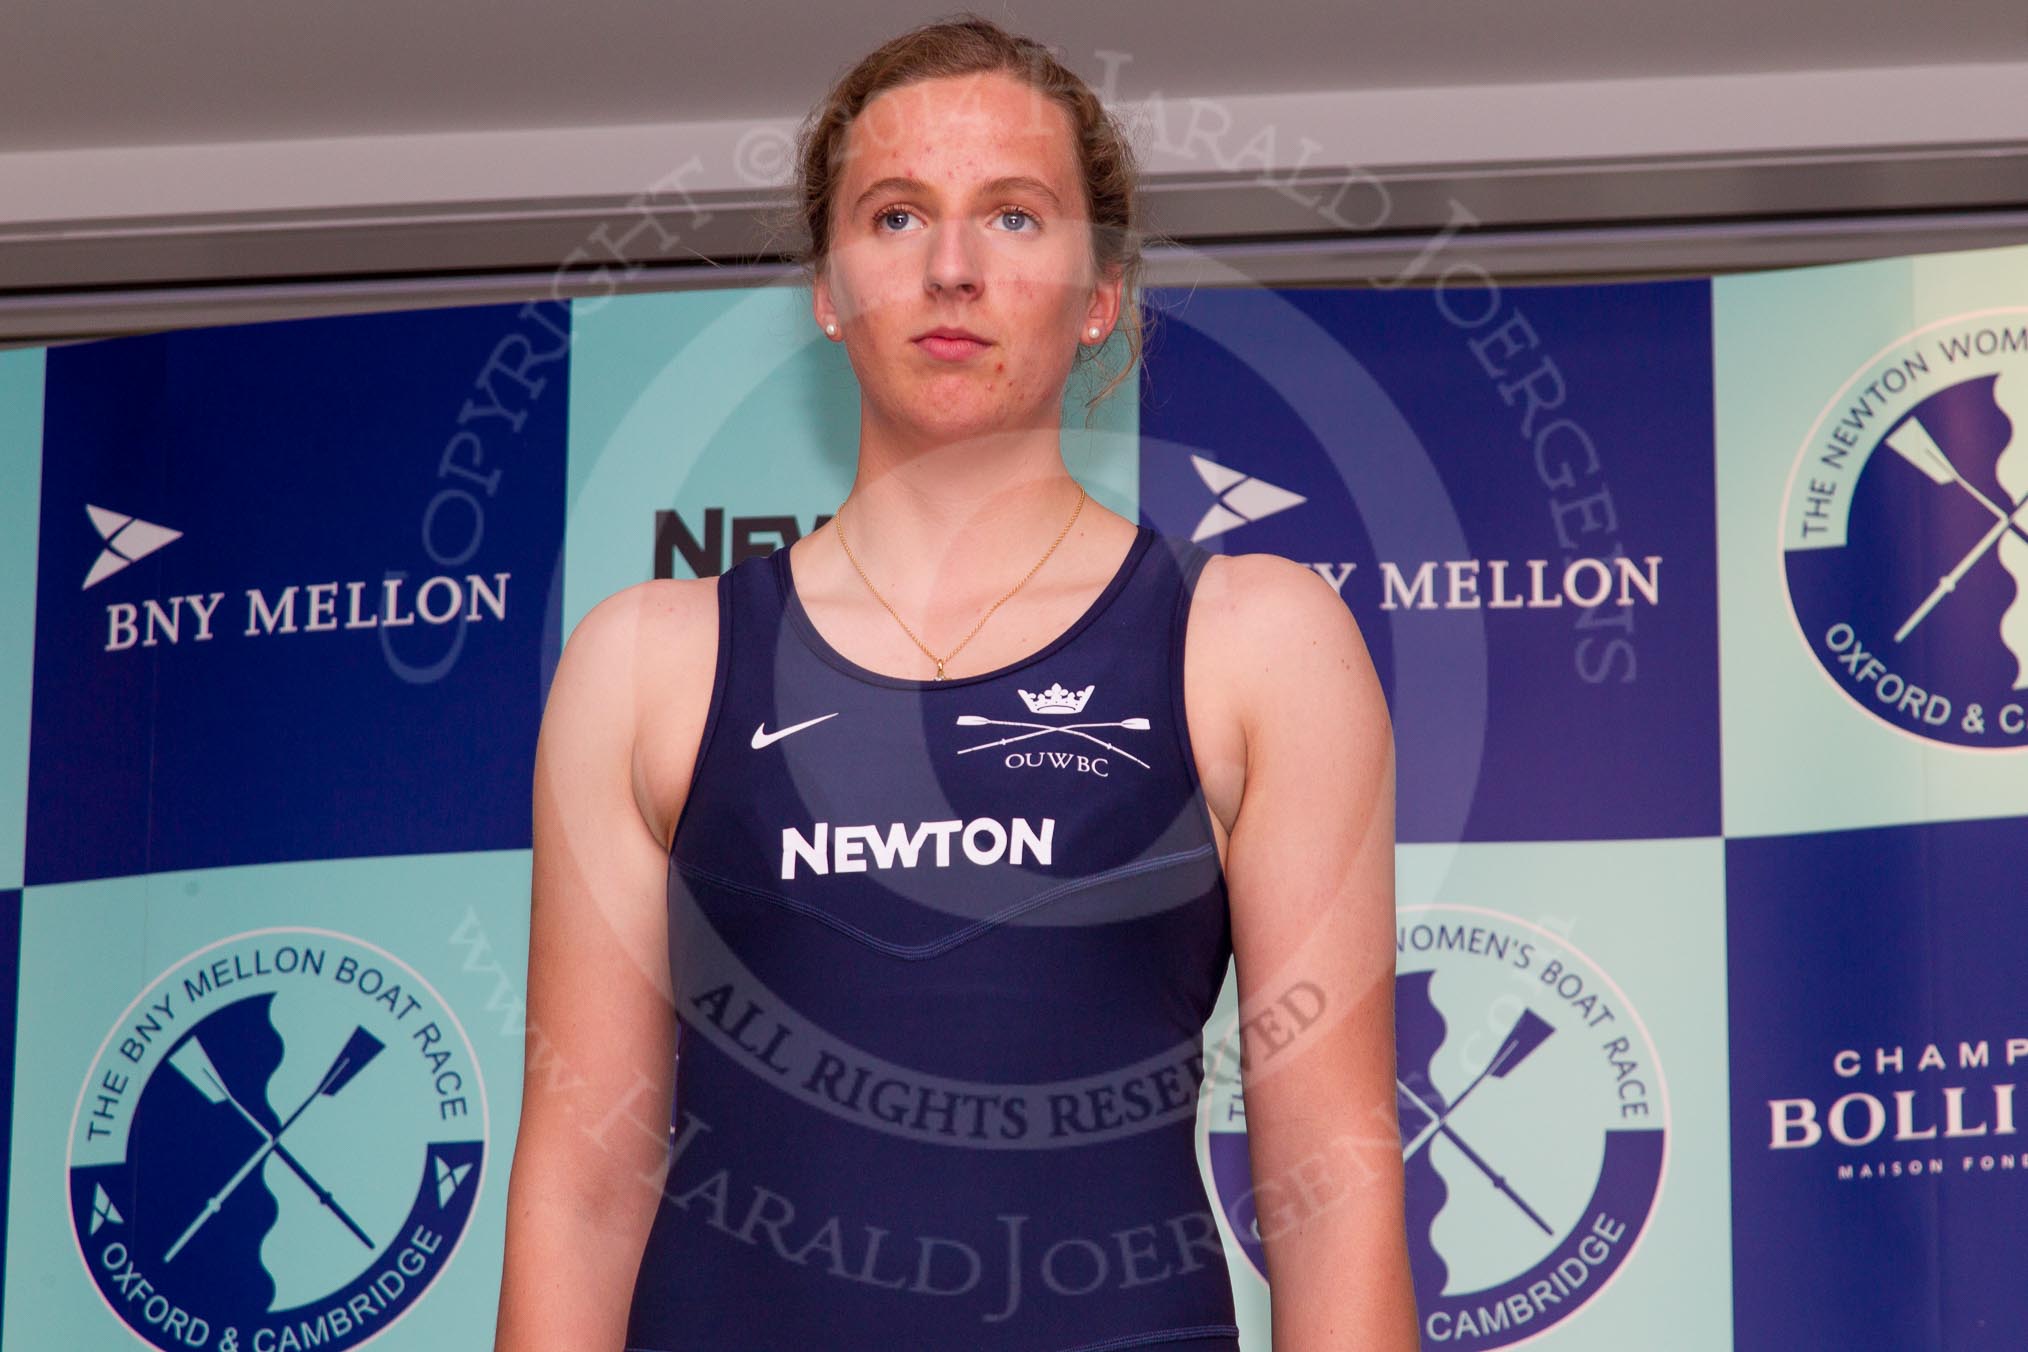 The Boat Race season 2014 - Crew Announcement and Weigh In: The 2014 Women's Boat Race crews: Oxford 5 seat Anastasia Chitty - 69.4kg..
BNY Mellon Centre,
London EC4V 4LA,
London,
United Kingdom,
on 10 March 2014 at 11:47, image #34